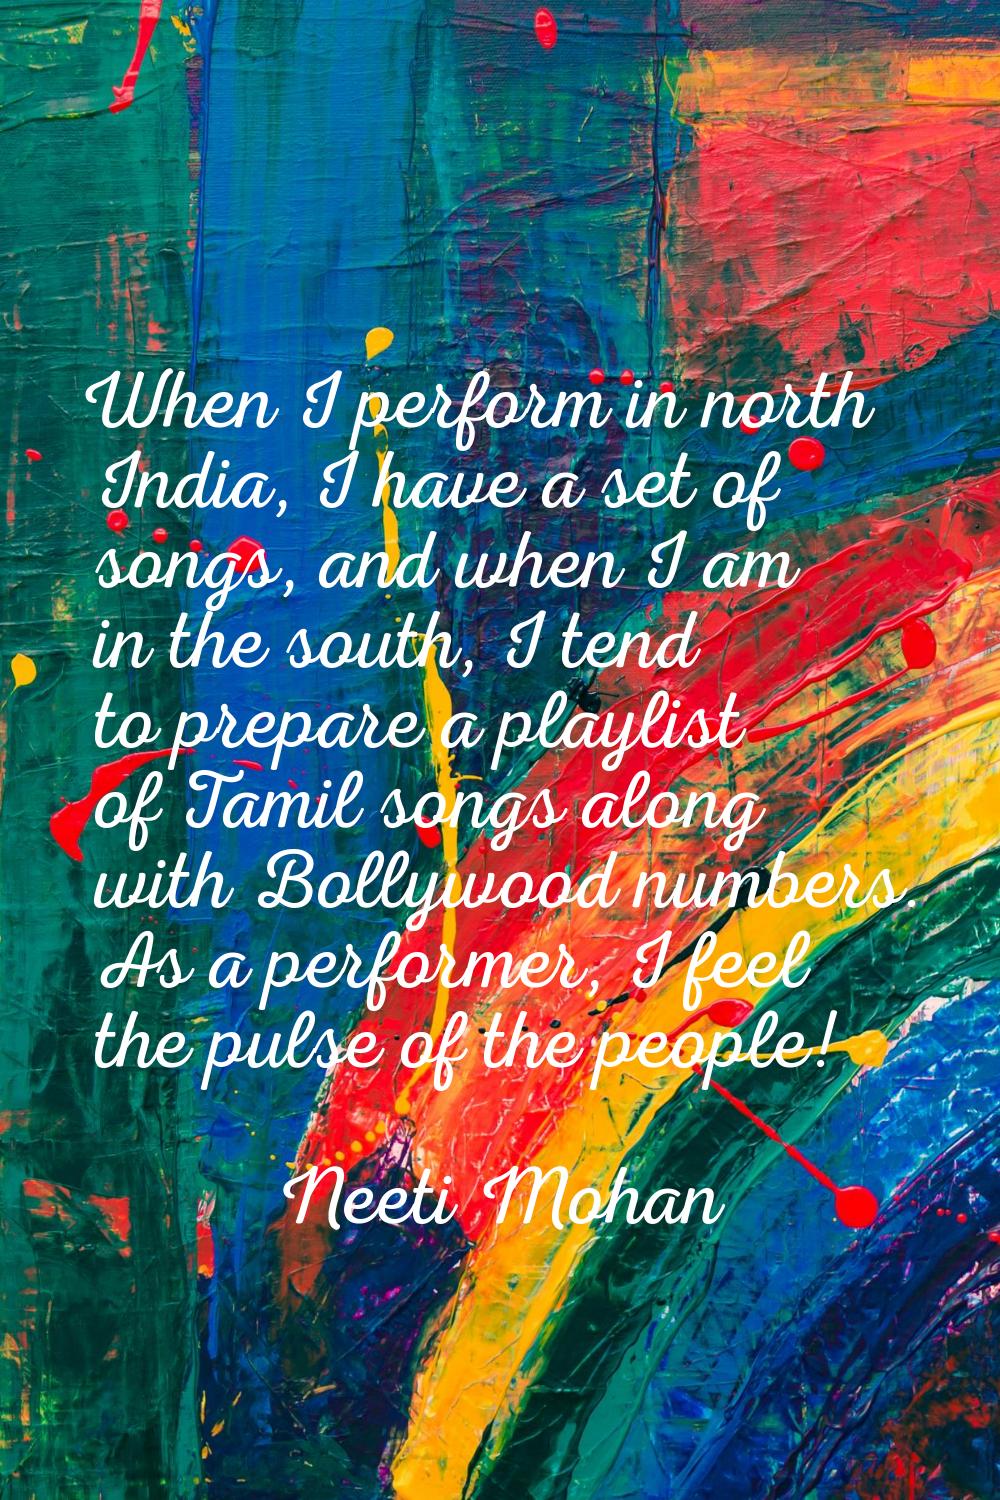 When I perform in north India, I have a set of songs, and when I am in the south, I tend to prepare